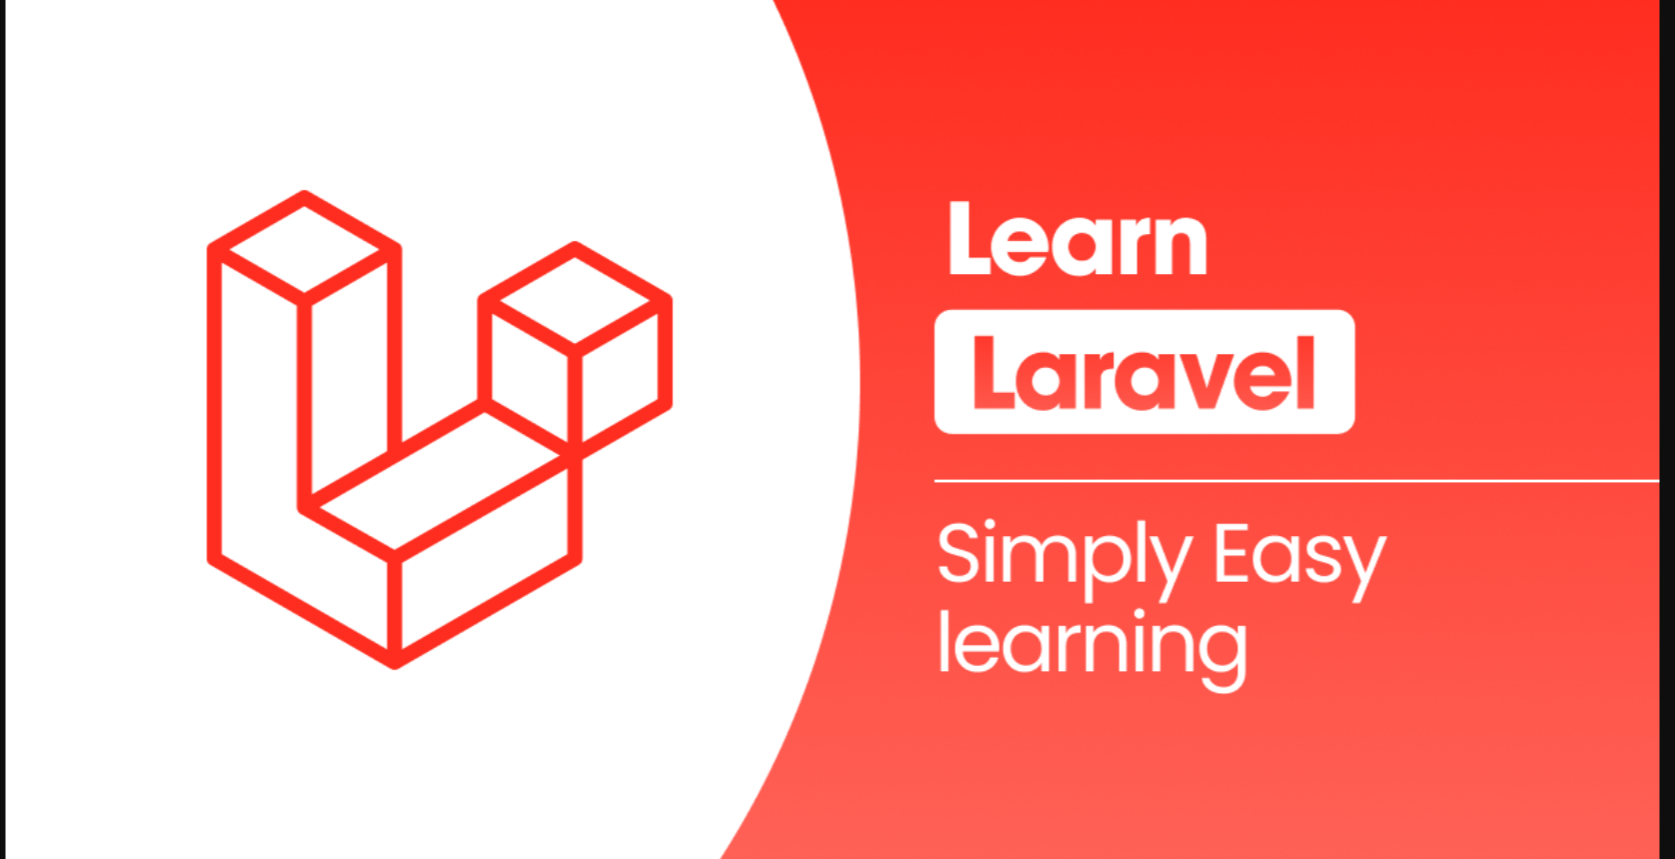 How to improve your Laravel development skills by reading code